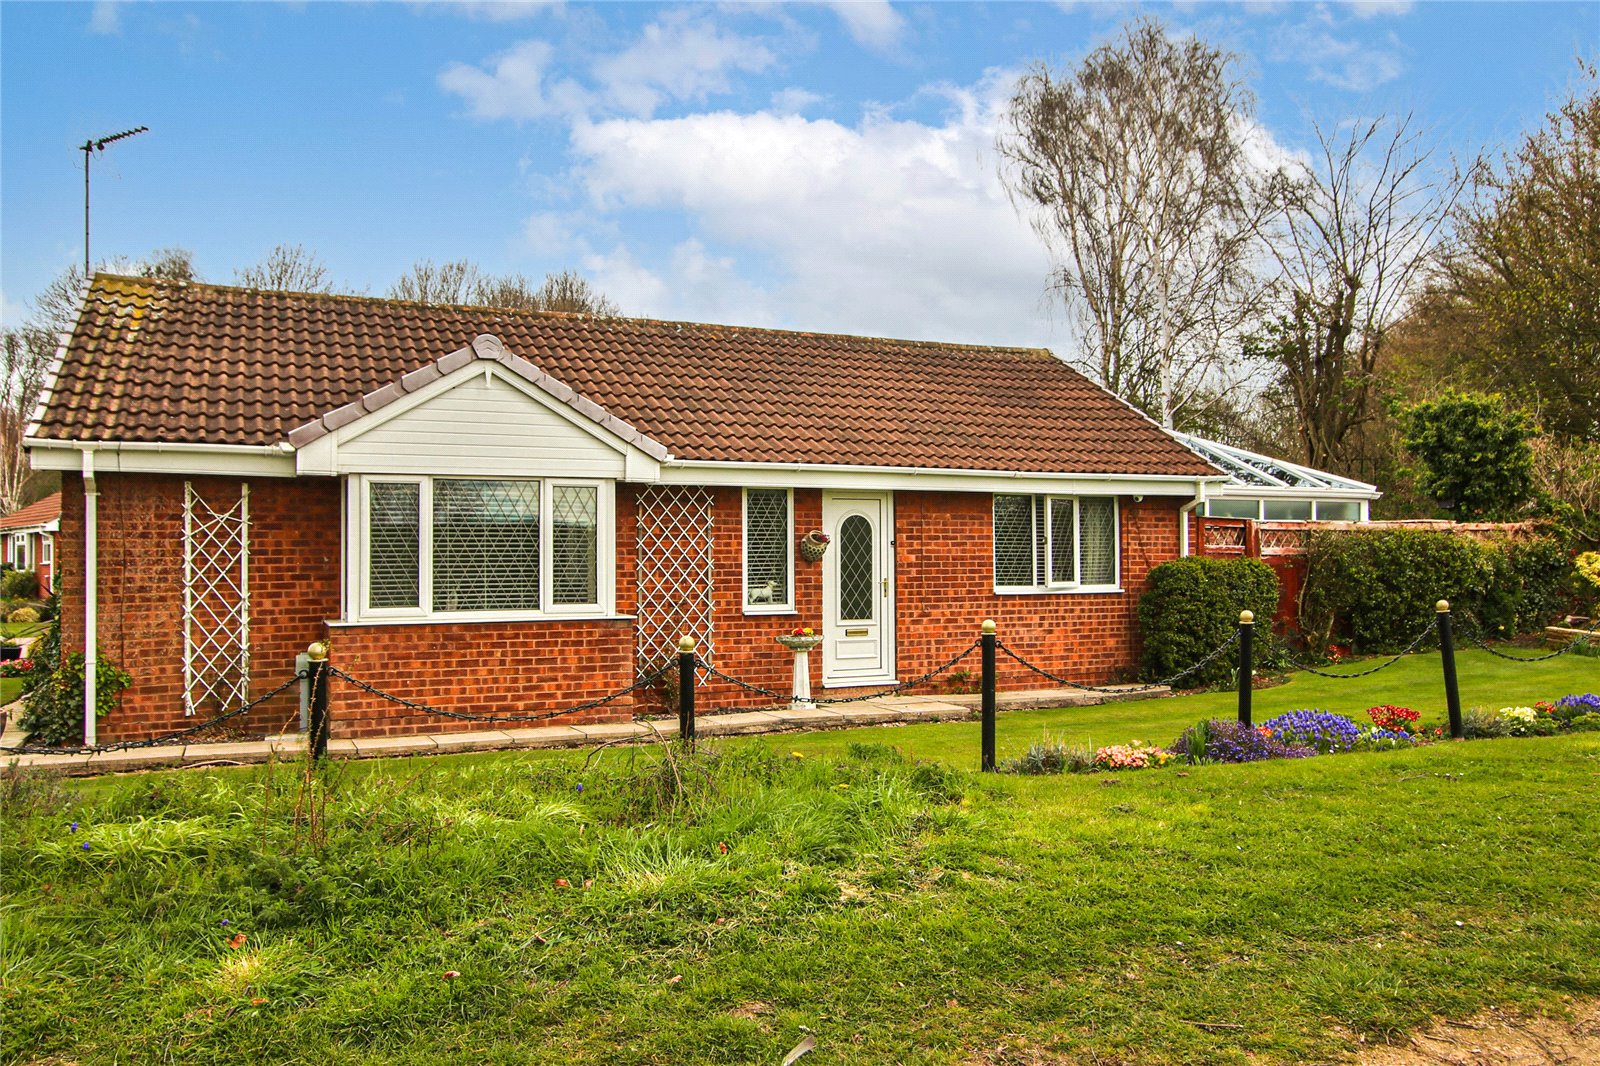 2 bed bungalow for sale in Oxenhope Road, Hull, HU6 